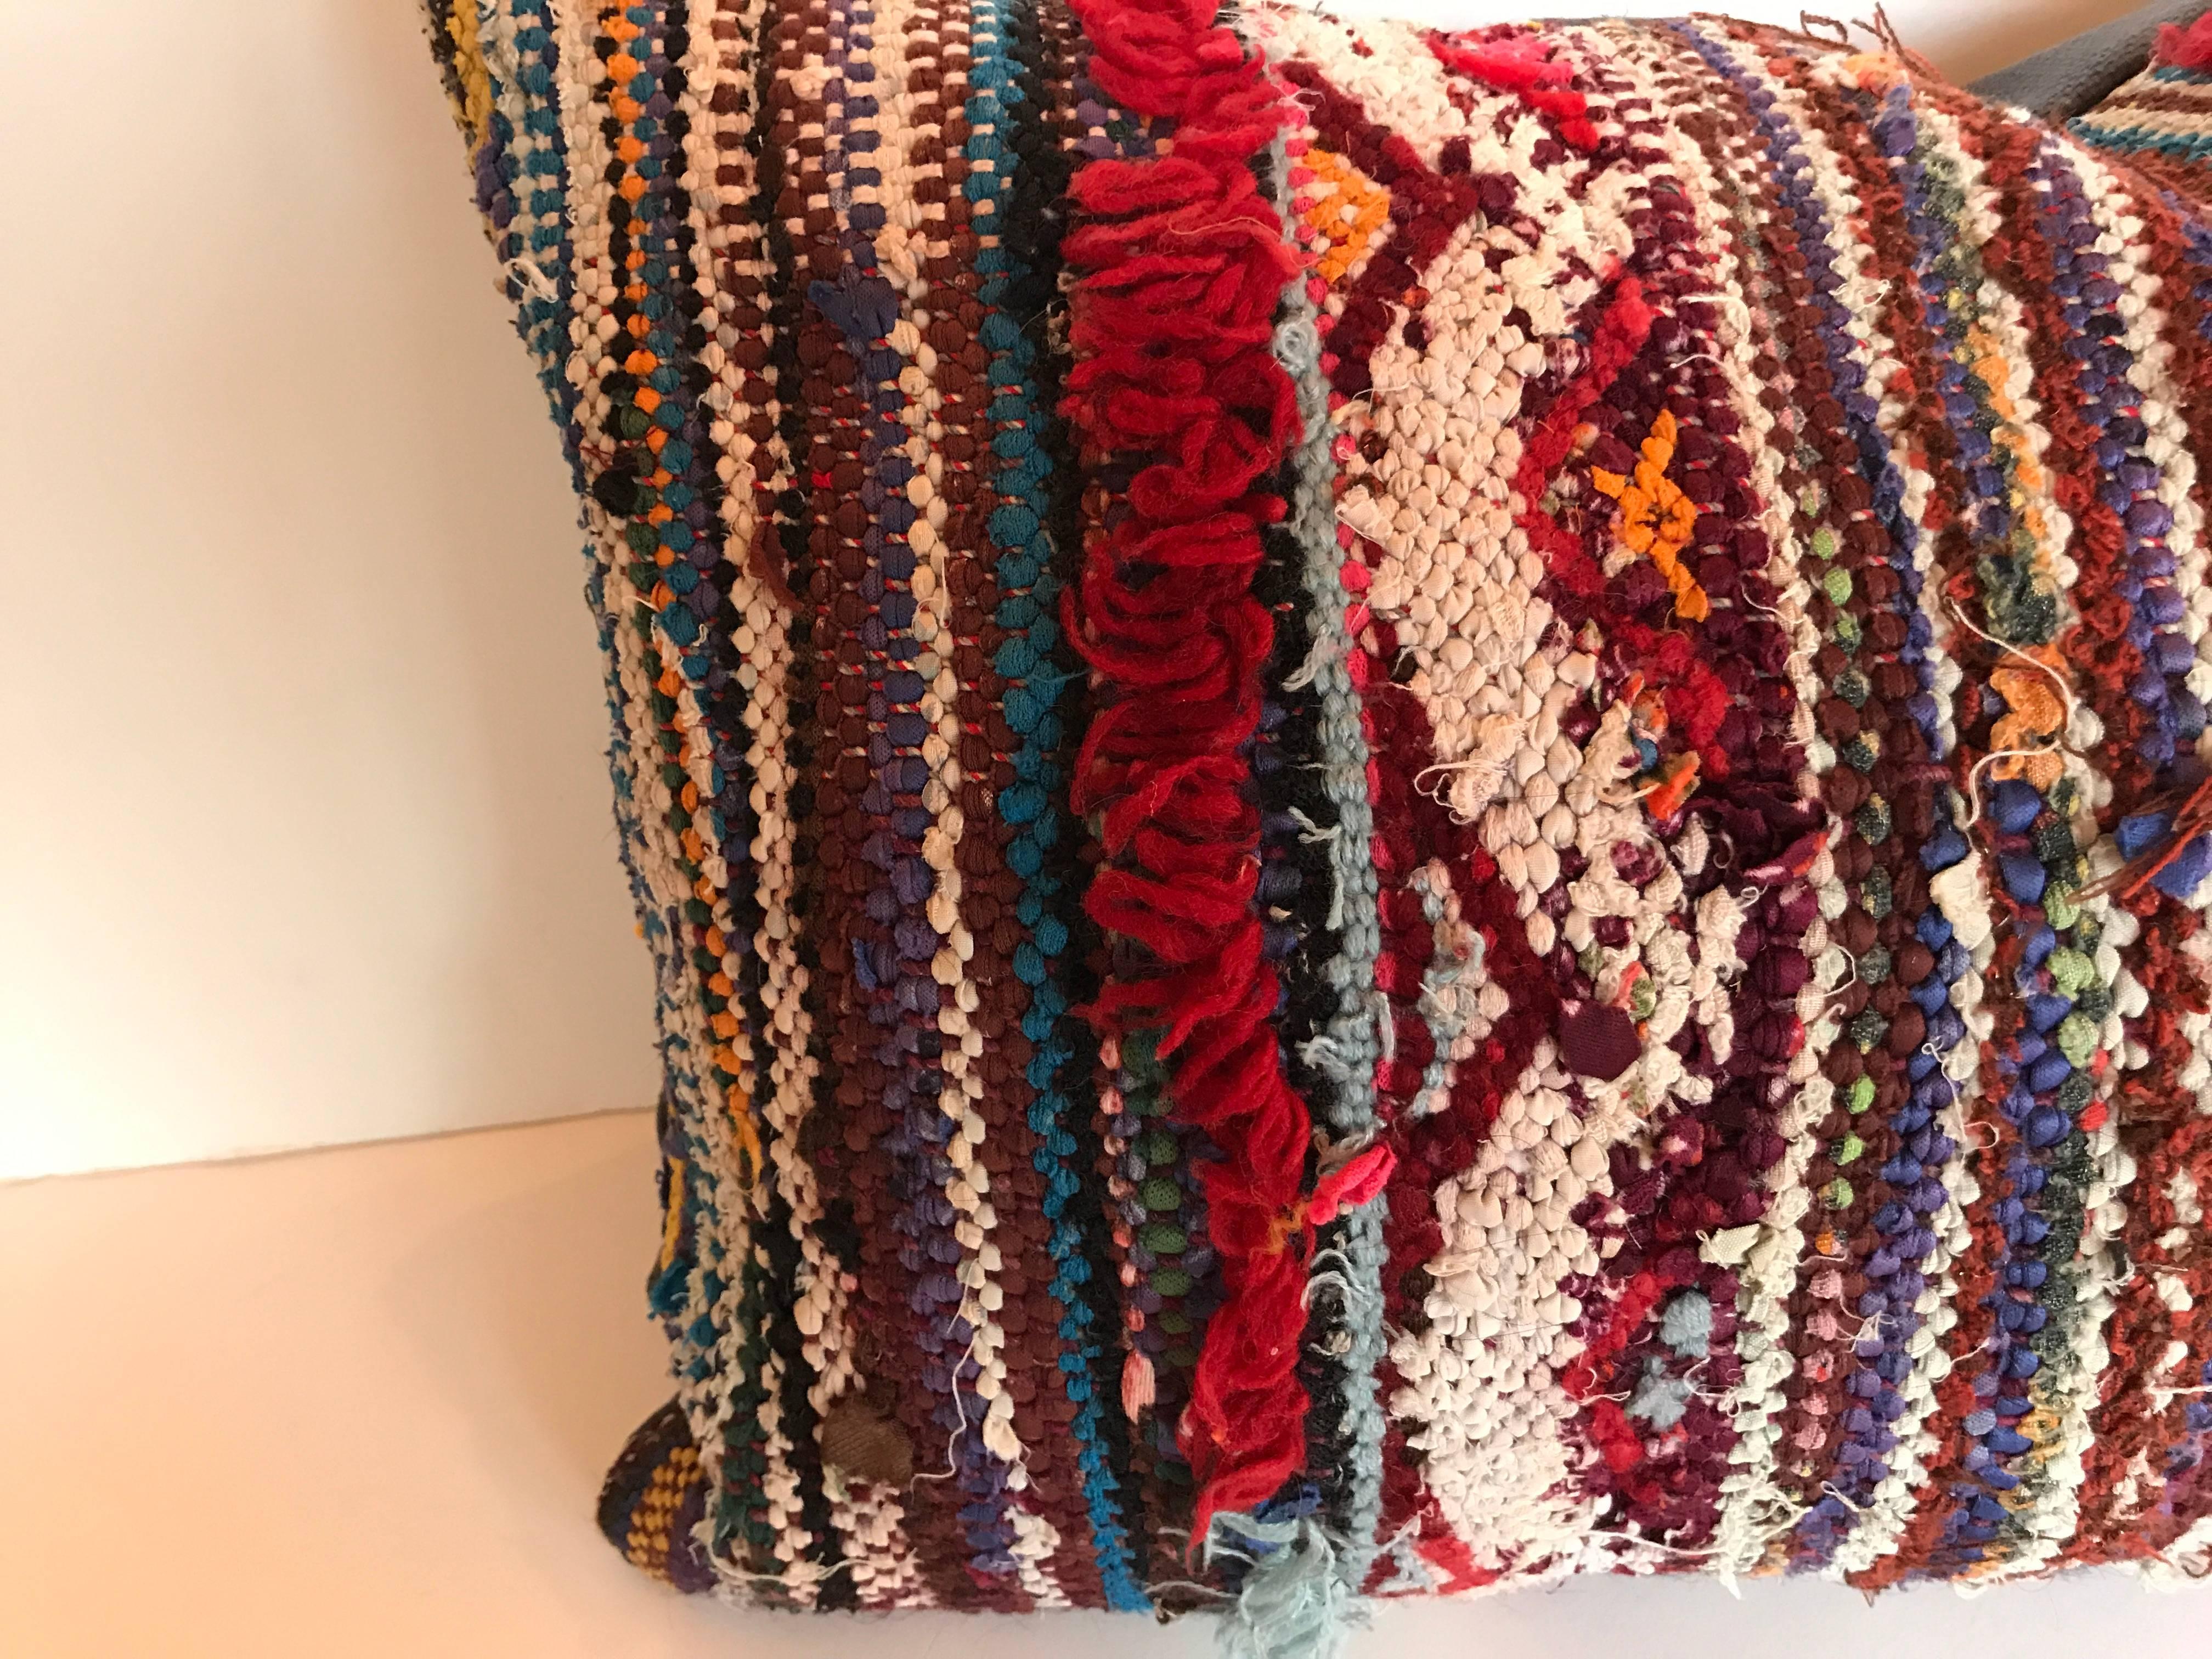 Custom pillow cut from a vintage Moroccan Berber boucherouite hand loomed rug from the Atlas Mountains. The wool and cotton flat weave rug is embellished with tribal embroidered and tufted designs. Pillow is backed in linen, filled with an insert of